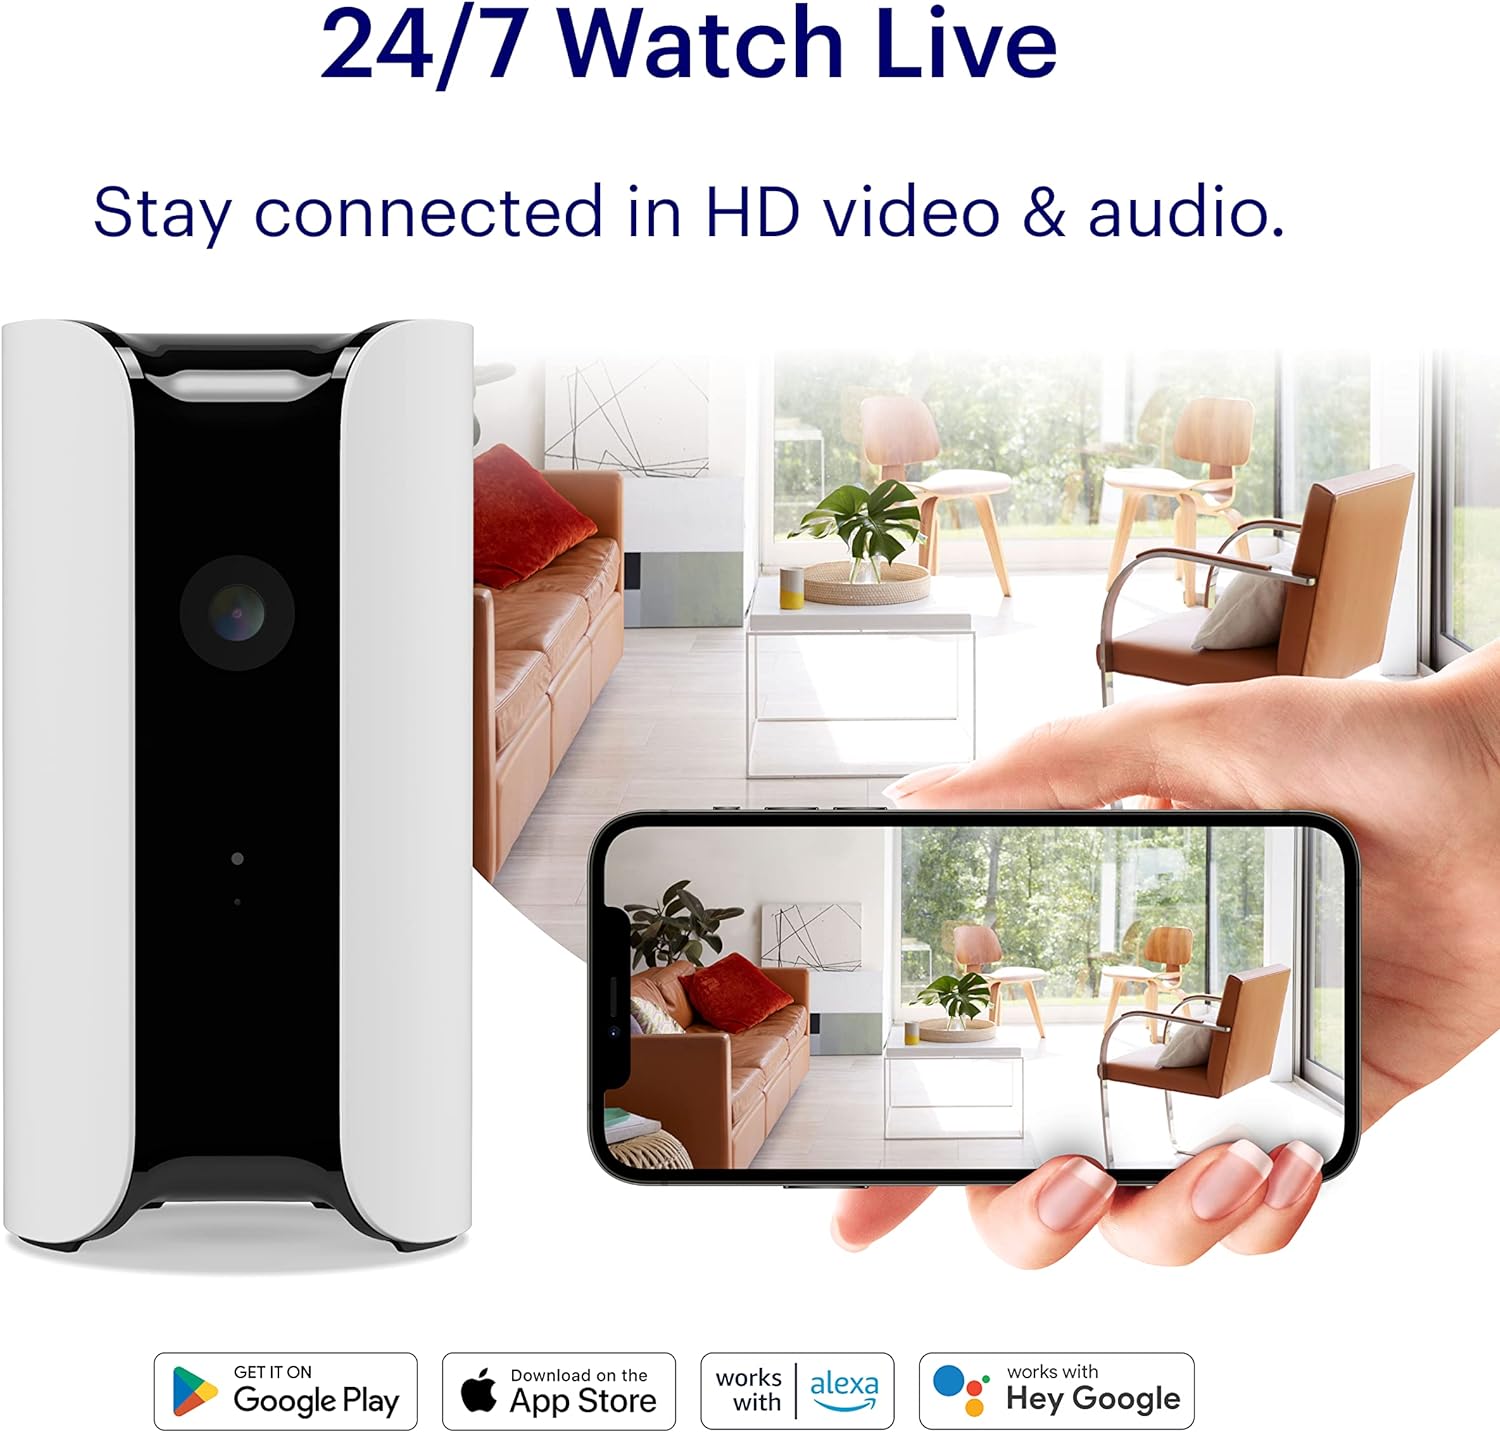 Canary Pro Indoor Home Security Camera 1080p HD WiFi IP | 24/7 Watch Live Video - $105